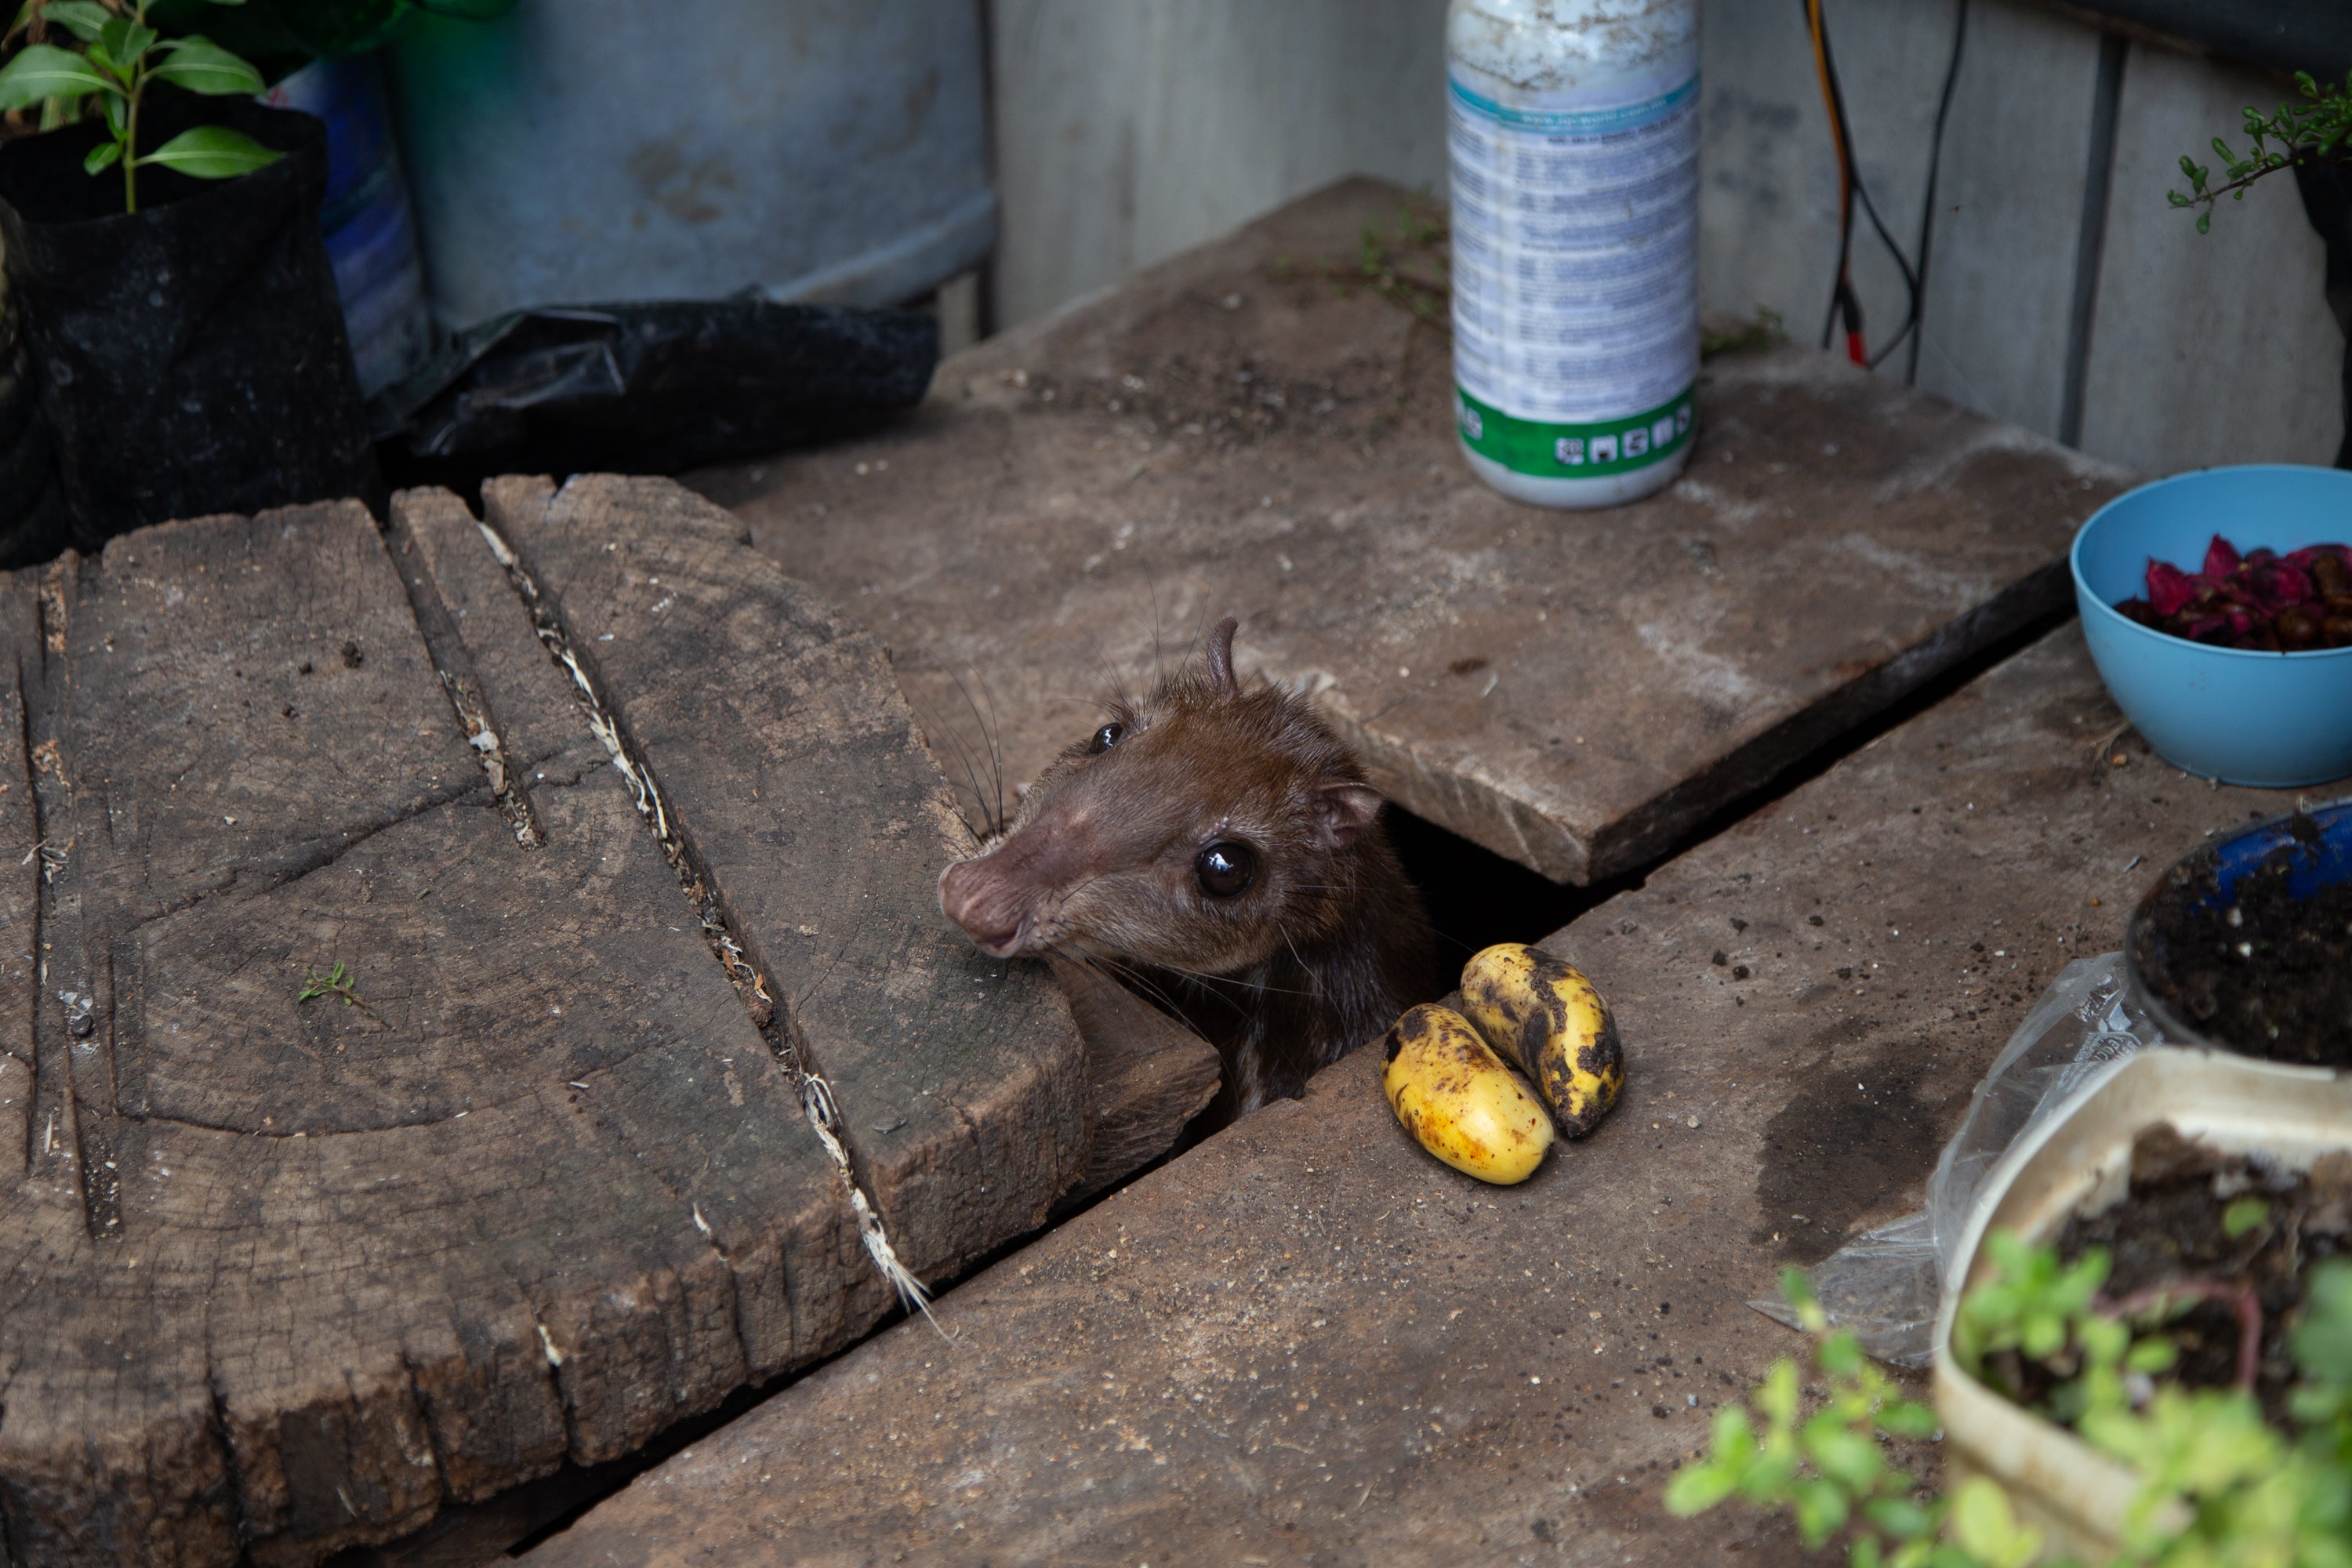 Tepezcuintles are wild rodents that are both kept as pets and hunted for their meat in Mexico